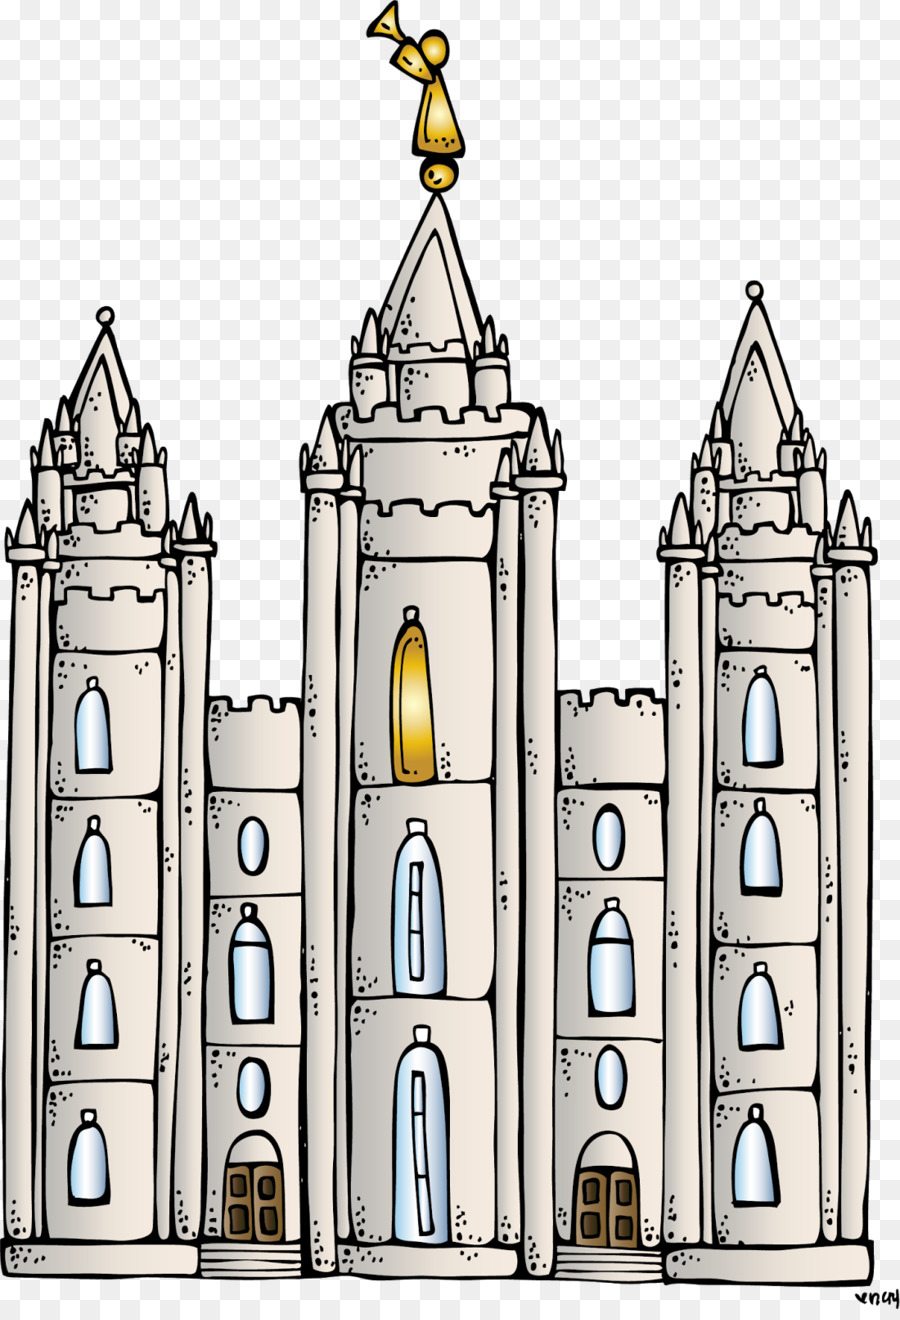 Salt Lake Temple Kirtland Temple LDS General Conference Clip art - temple png download - 1100*1600 - Free Transparent Salt Lake Temple png Download.